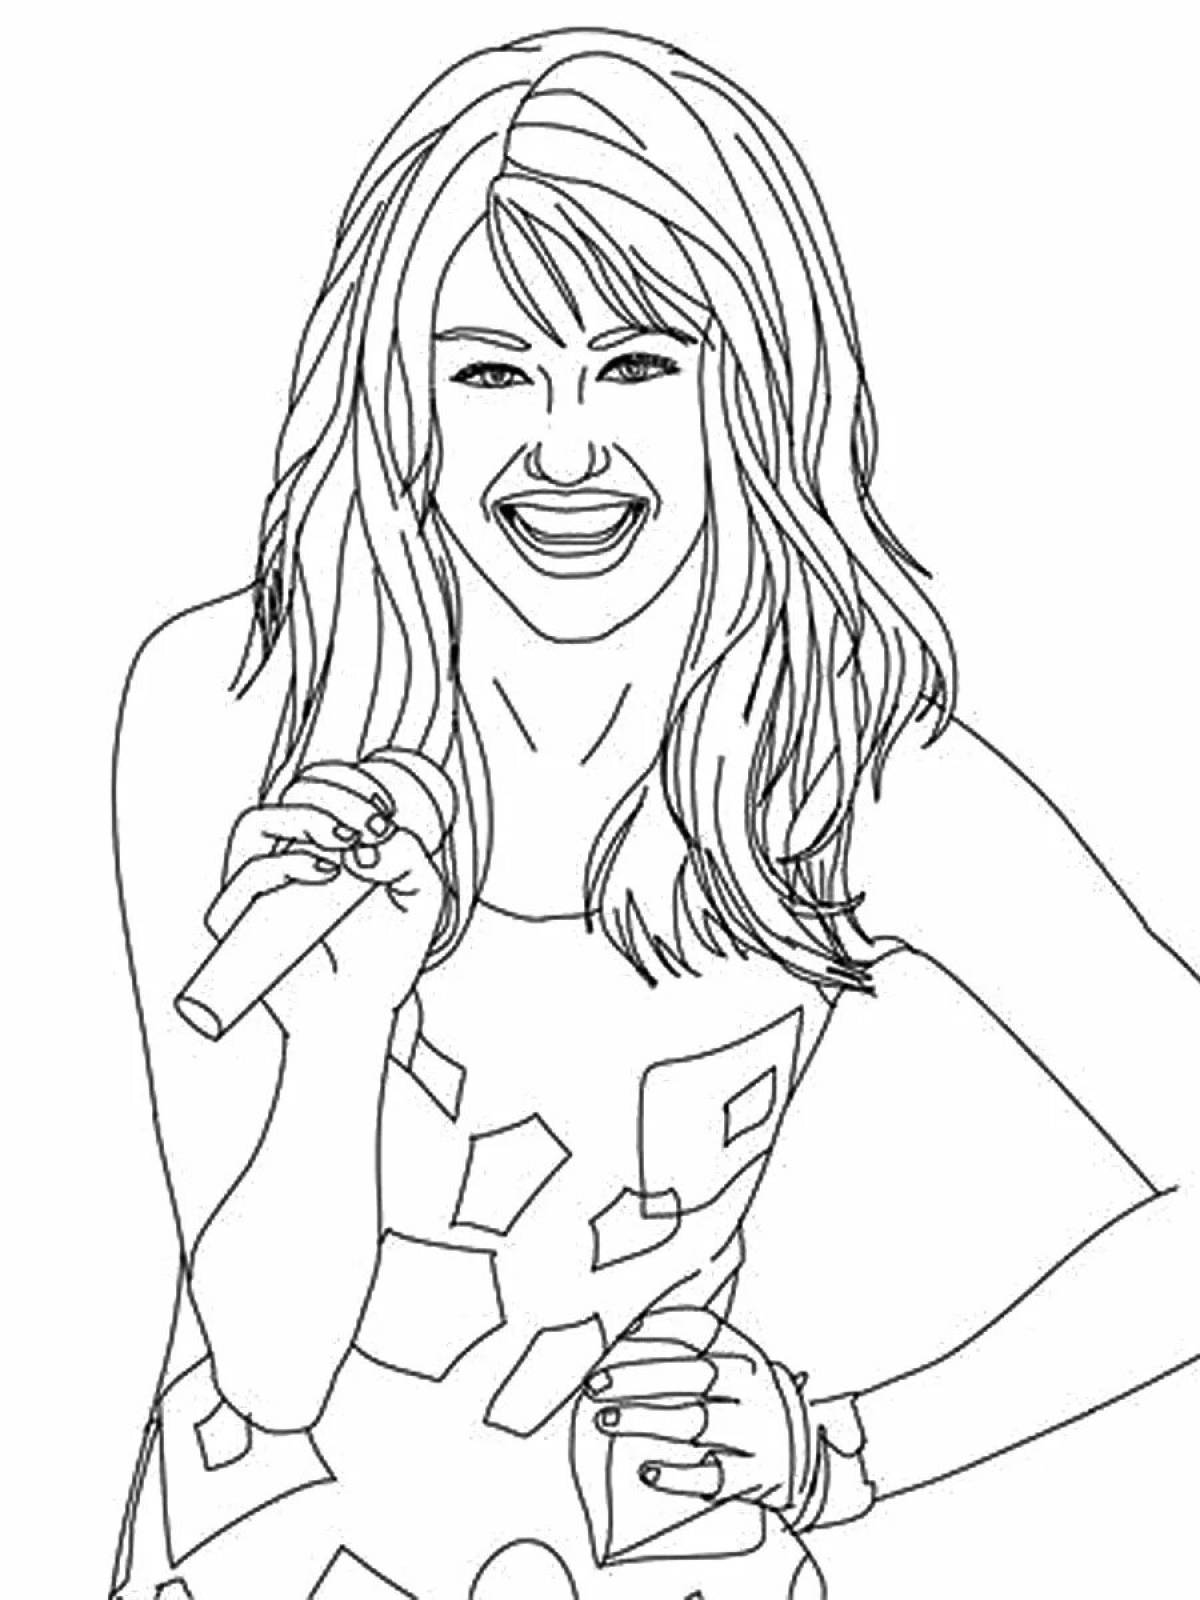 Blessed Miley Cyrus coloring page